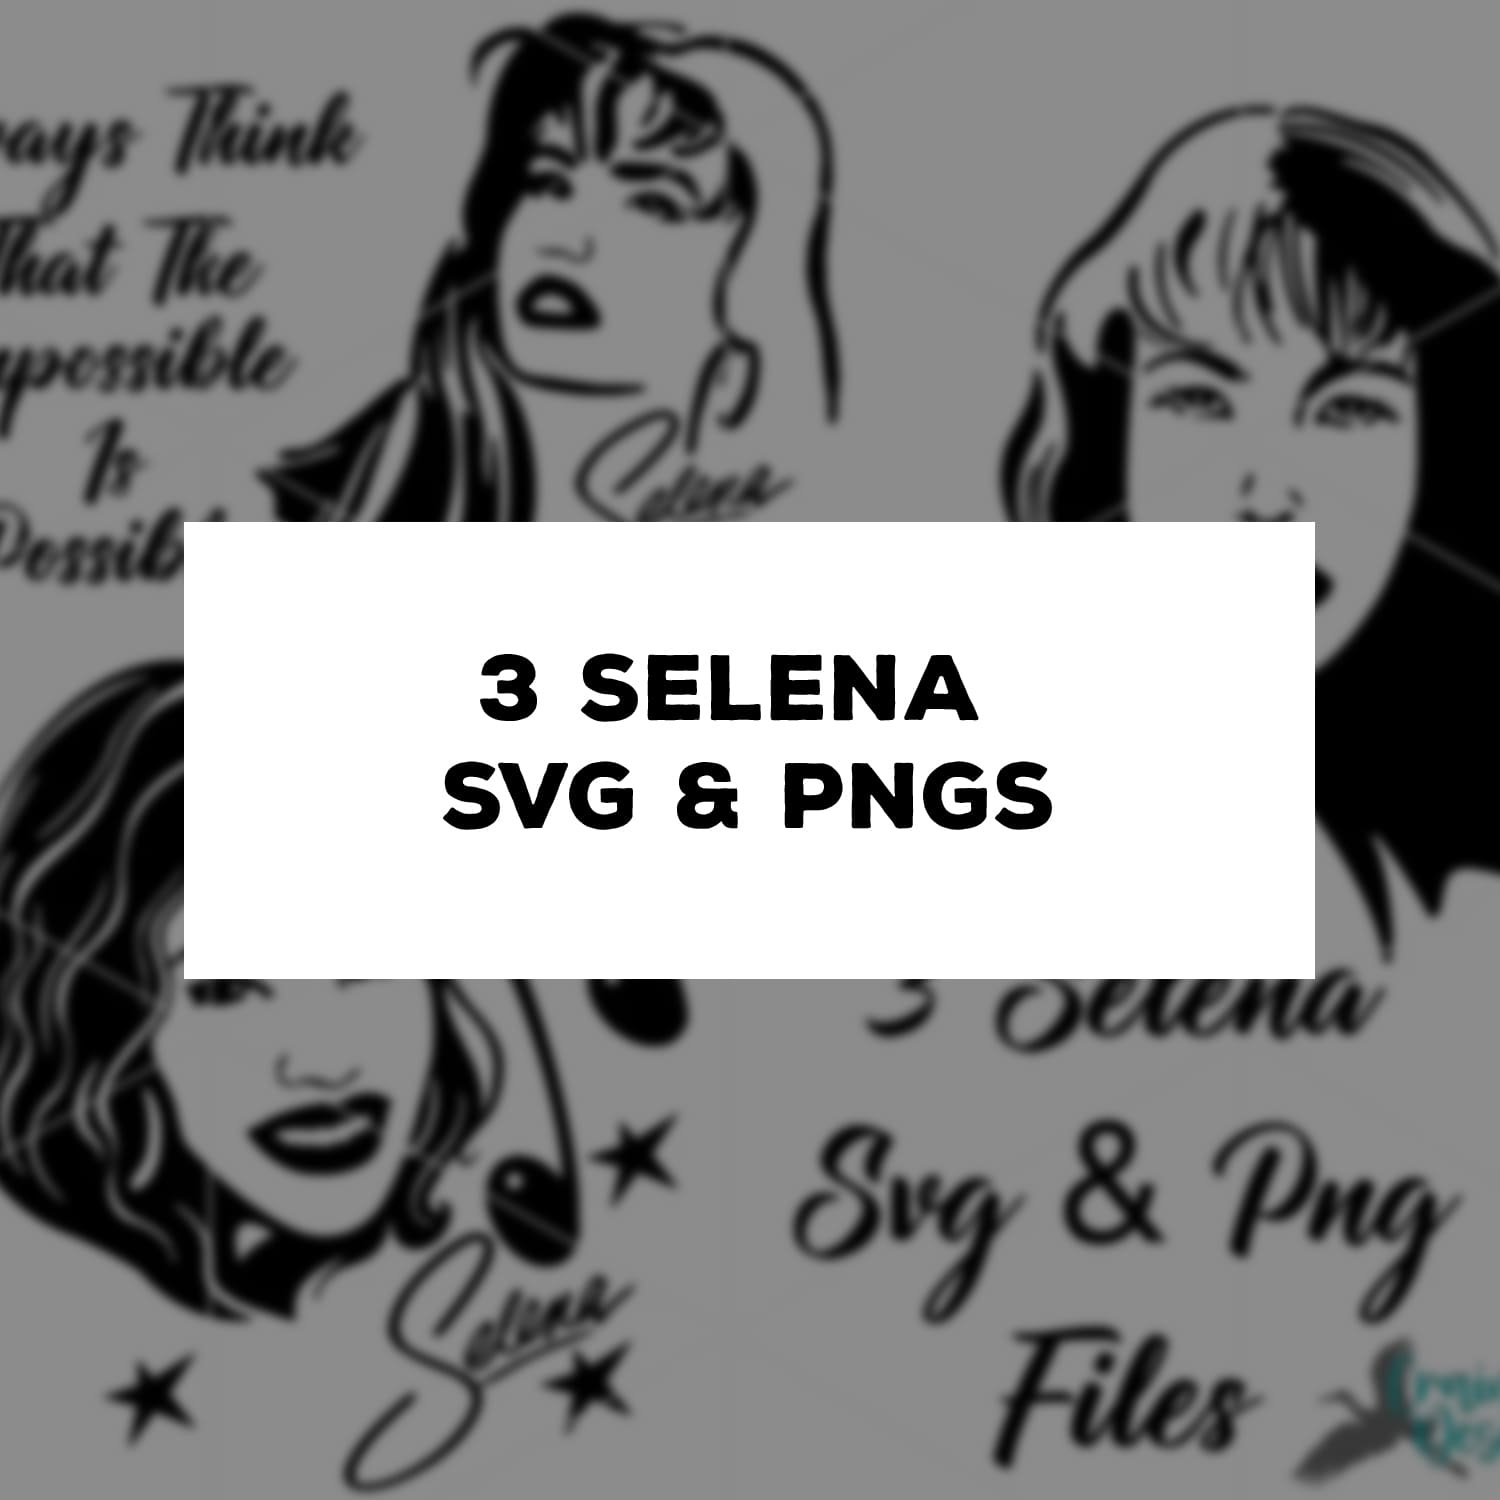 3 selena svg pngs for your t-shirt design.